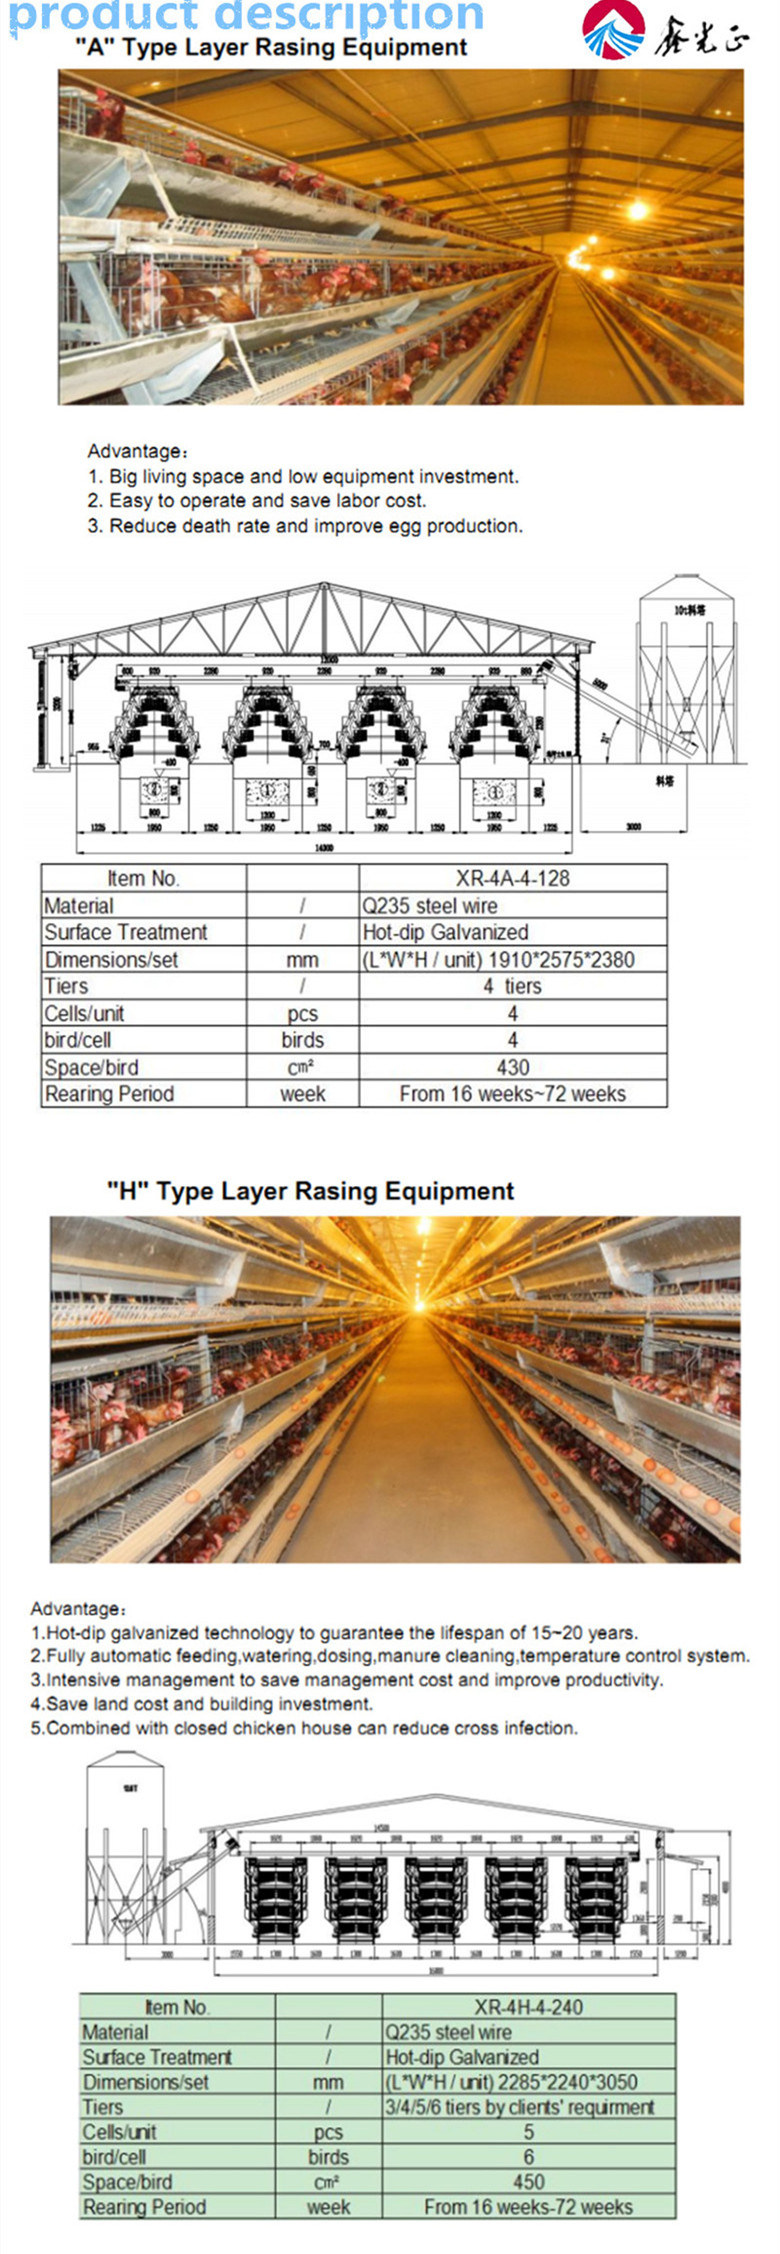 5 Layers of Laying Hens Equipment and Houses